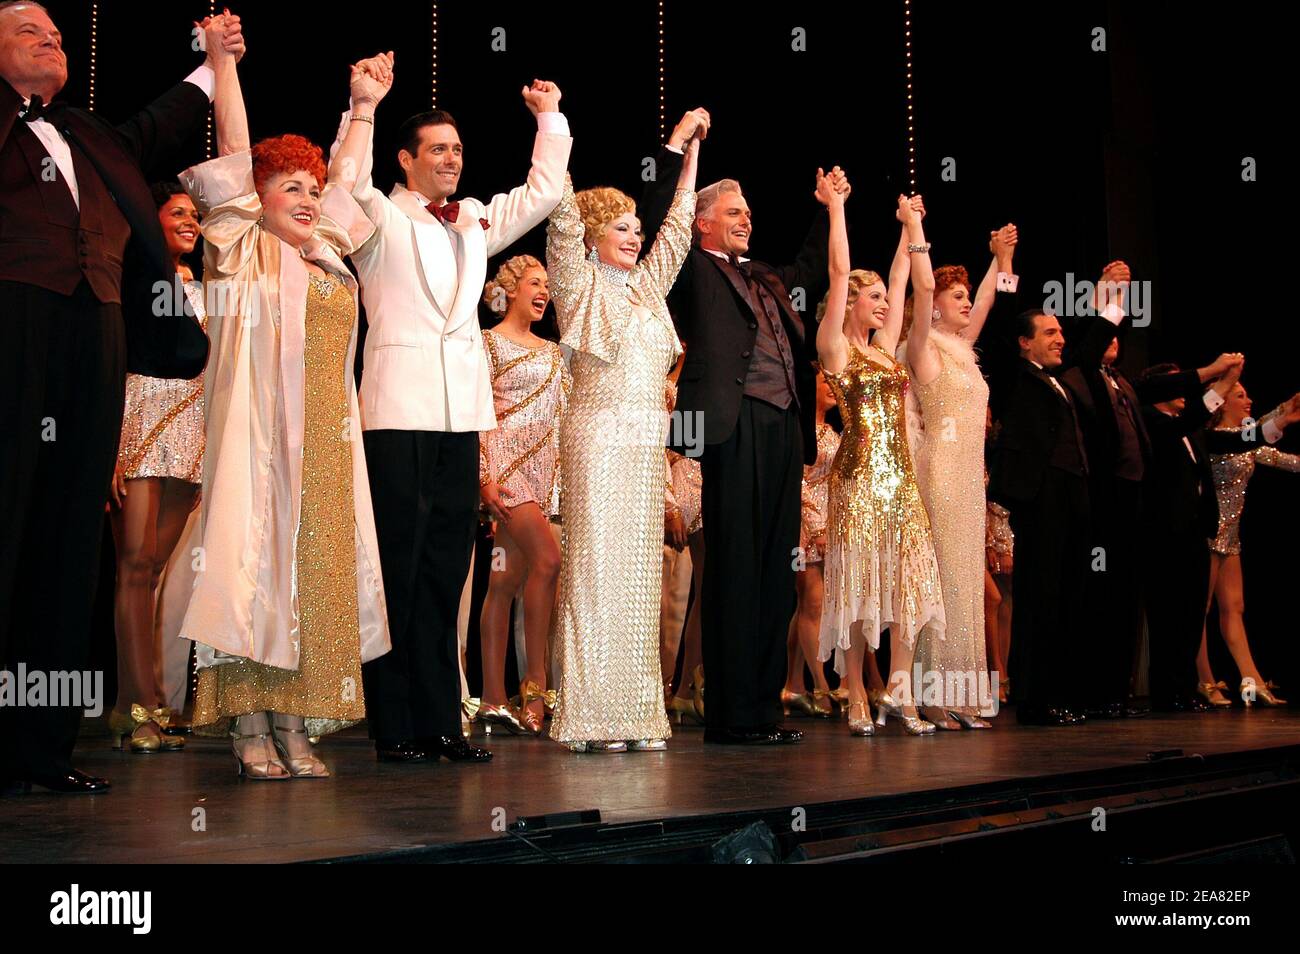 David Elder, Nadine Isenegger, Shirley Jones, Patrick Cassidy, Patti Mariano and Brad Aspel during the curtain call of the new Broadway production 42nd street, at Ford Center, in New York, NY, USA - May 7, 2004. (pictured: David Elder, Nadine Isenegger, Shirley Jones, Patrick Cassidy, Patti Mariano, Brad Aspel) Photo by Antoine Cau/Abaca Stock Photo